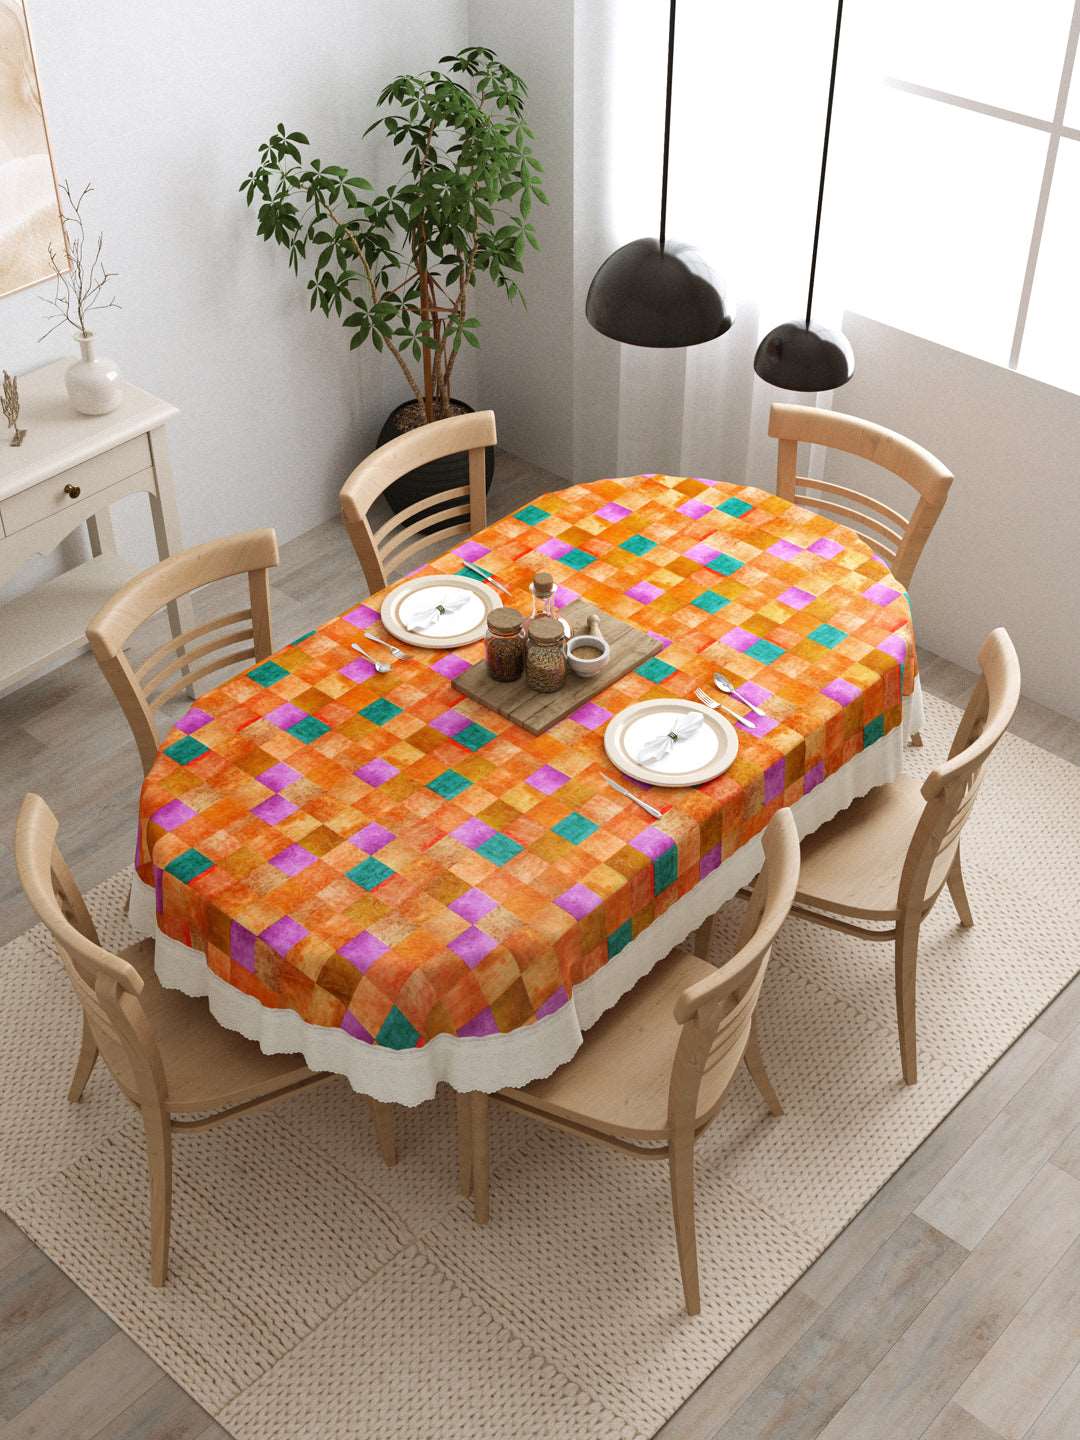 6 Seater Oval Dining Table Cover; 60x90 Inches; Material - PVC; Anti Slip; Checks On Orange